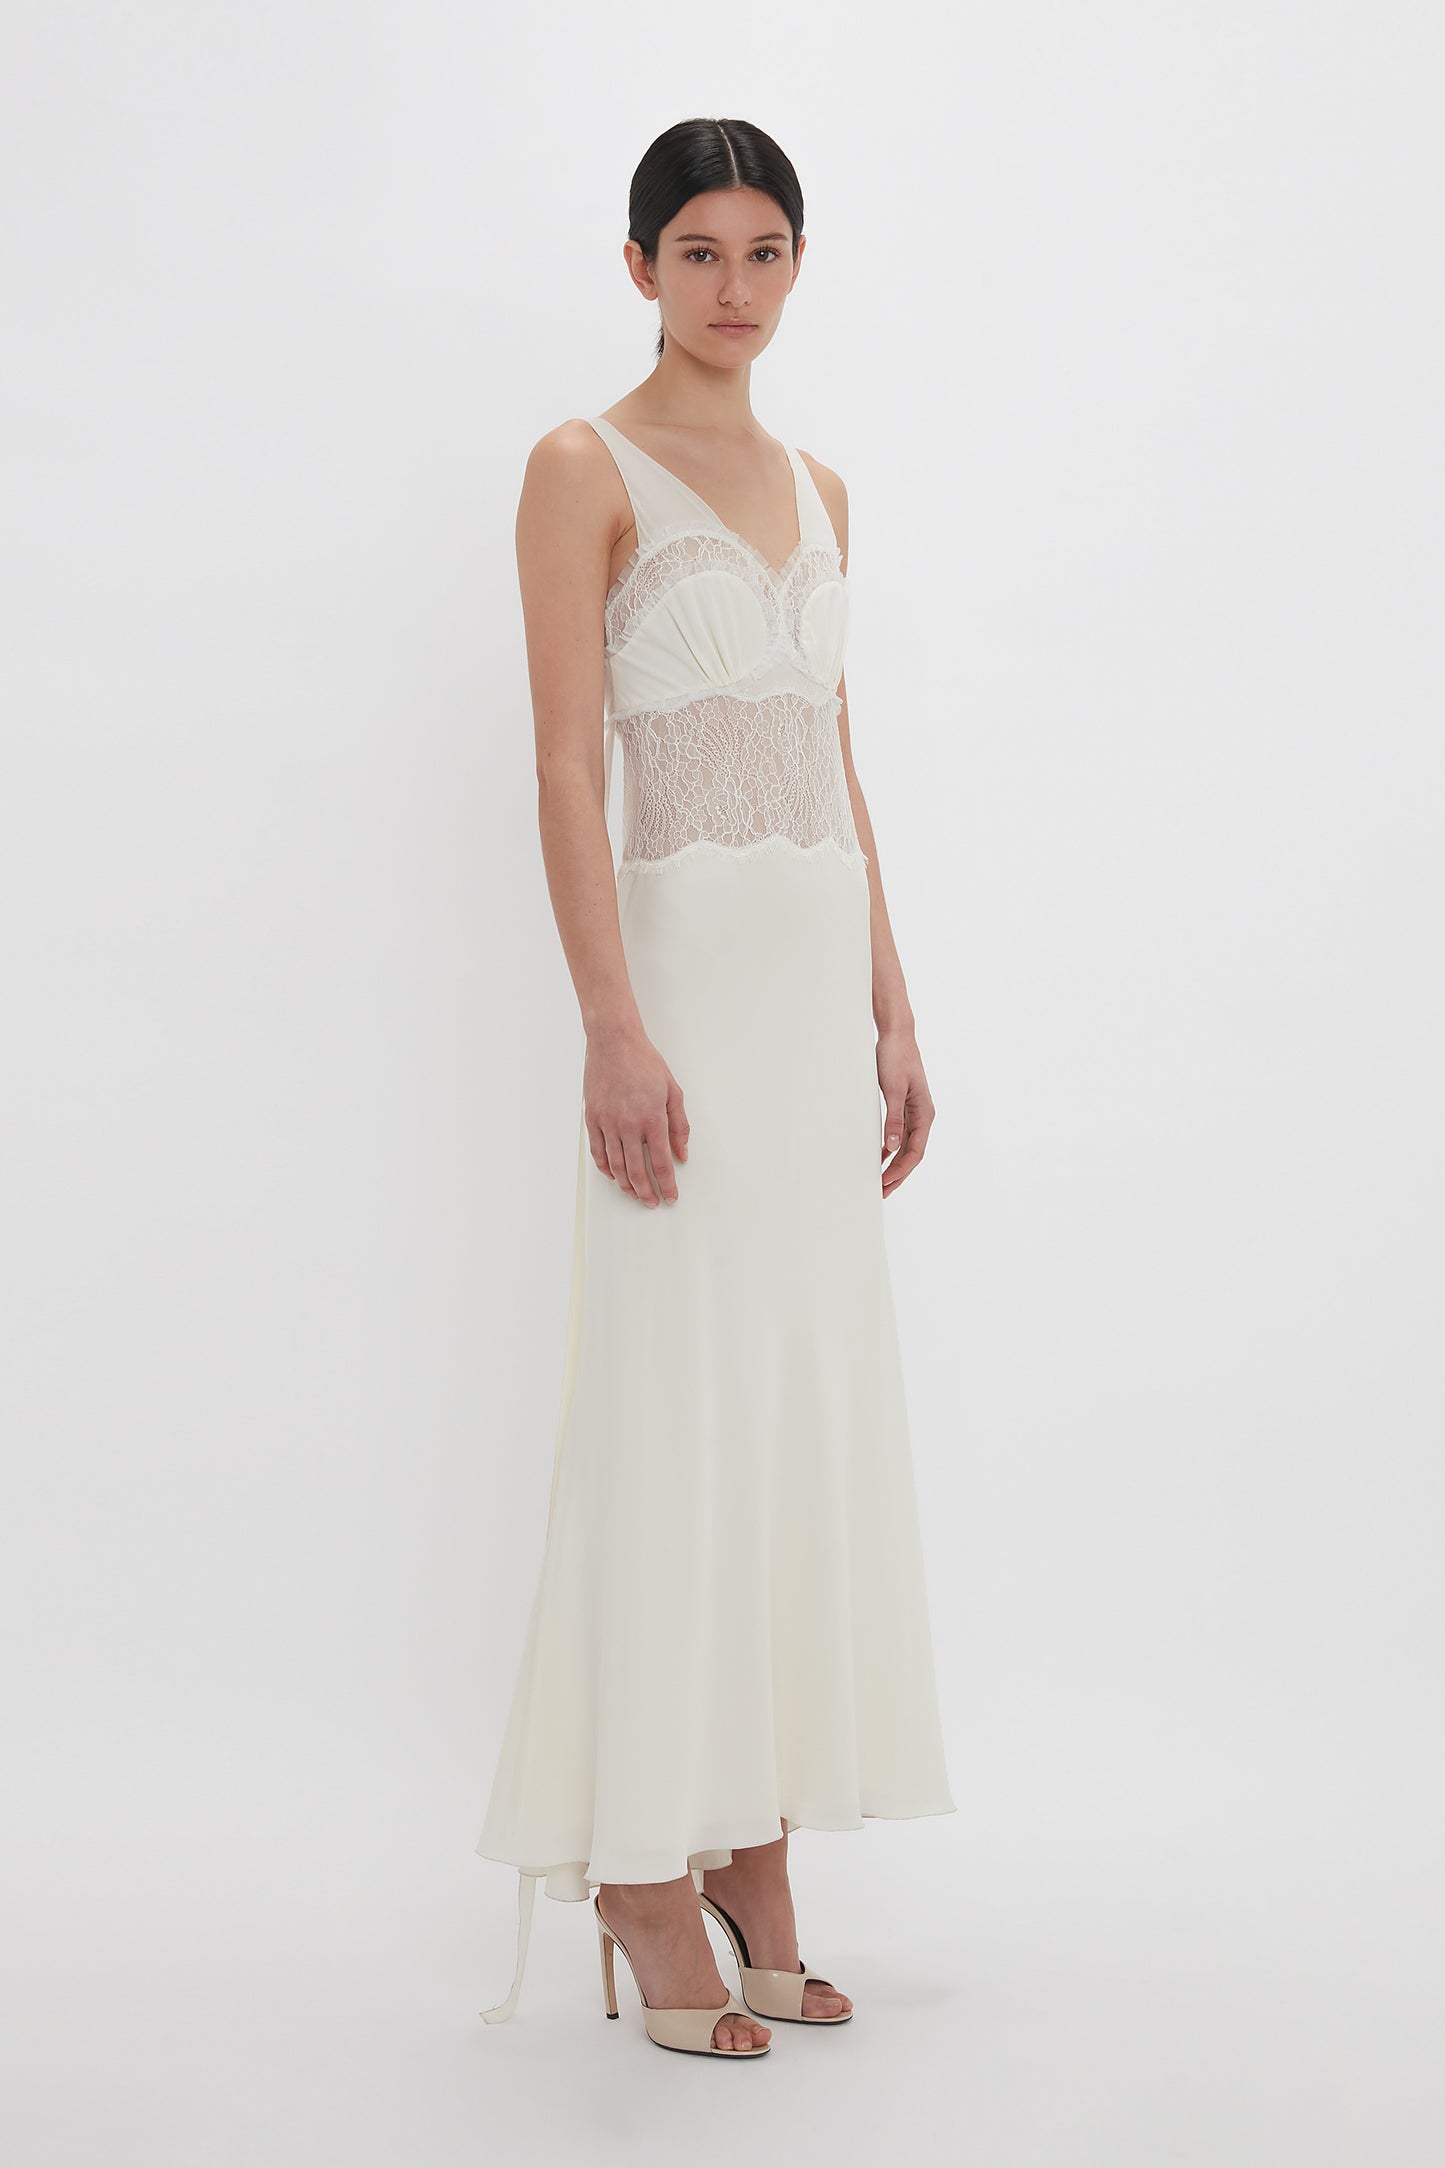 A person in an elegant Ruffle Detail Midi Dress In Ivory by Victoria Beckham with a tactile lace bodice and a silk skirt stands against a plain white background. The sleeveless dress features spaghetti straps and a flowy fit, combining simplicity with refined elegance.